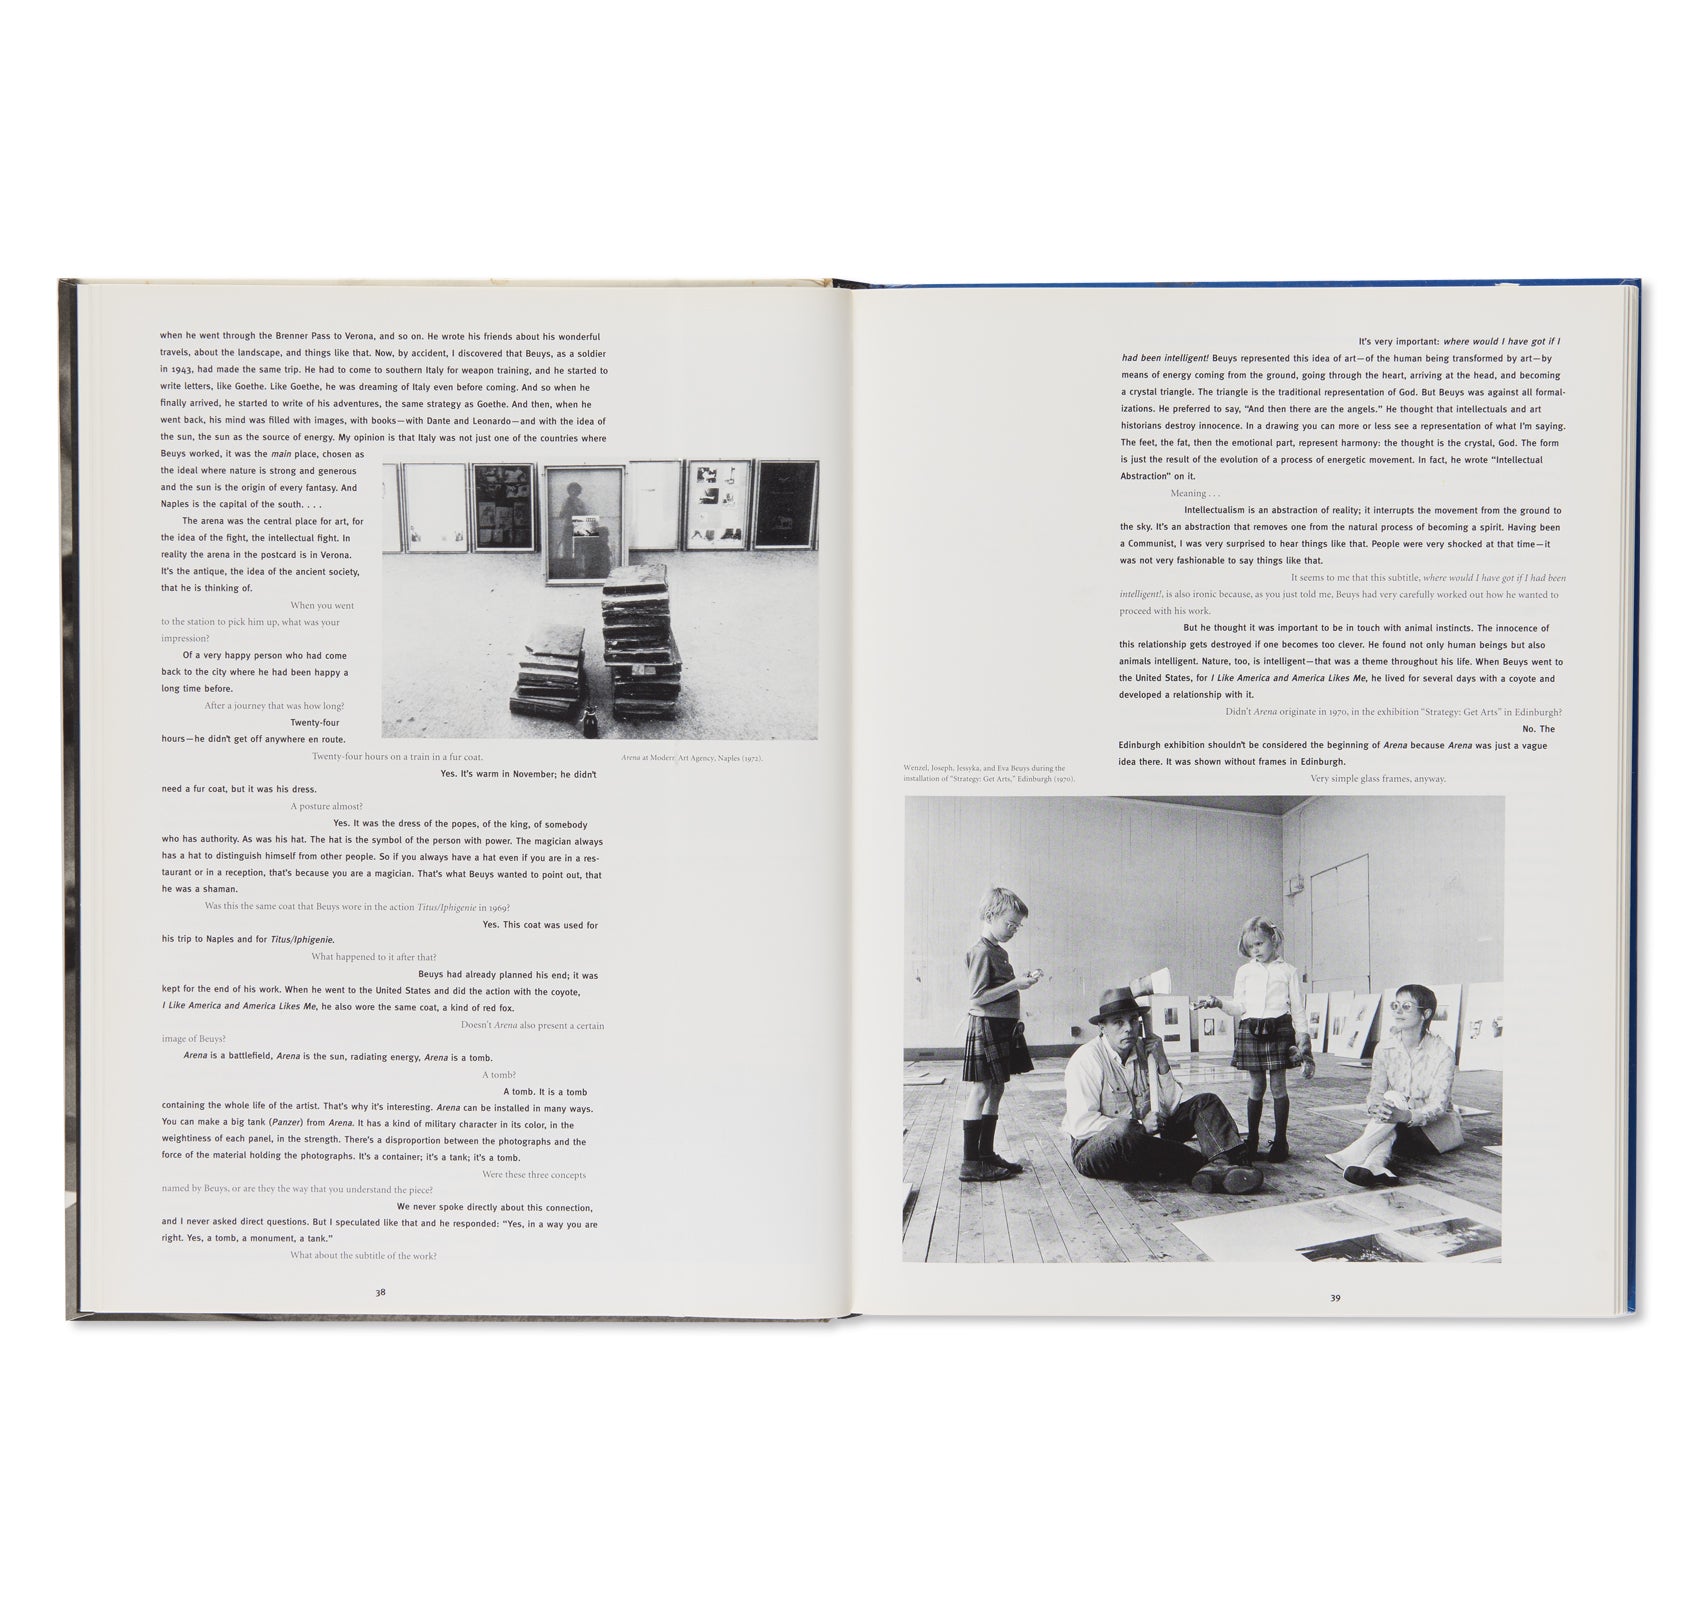 ARENA—WHERE WOULD I HAVE GOT IF I HAD BEEN INTELLIGENT! by Joseph Beuys